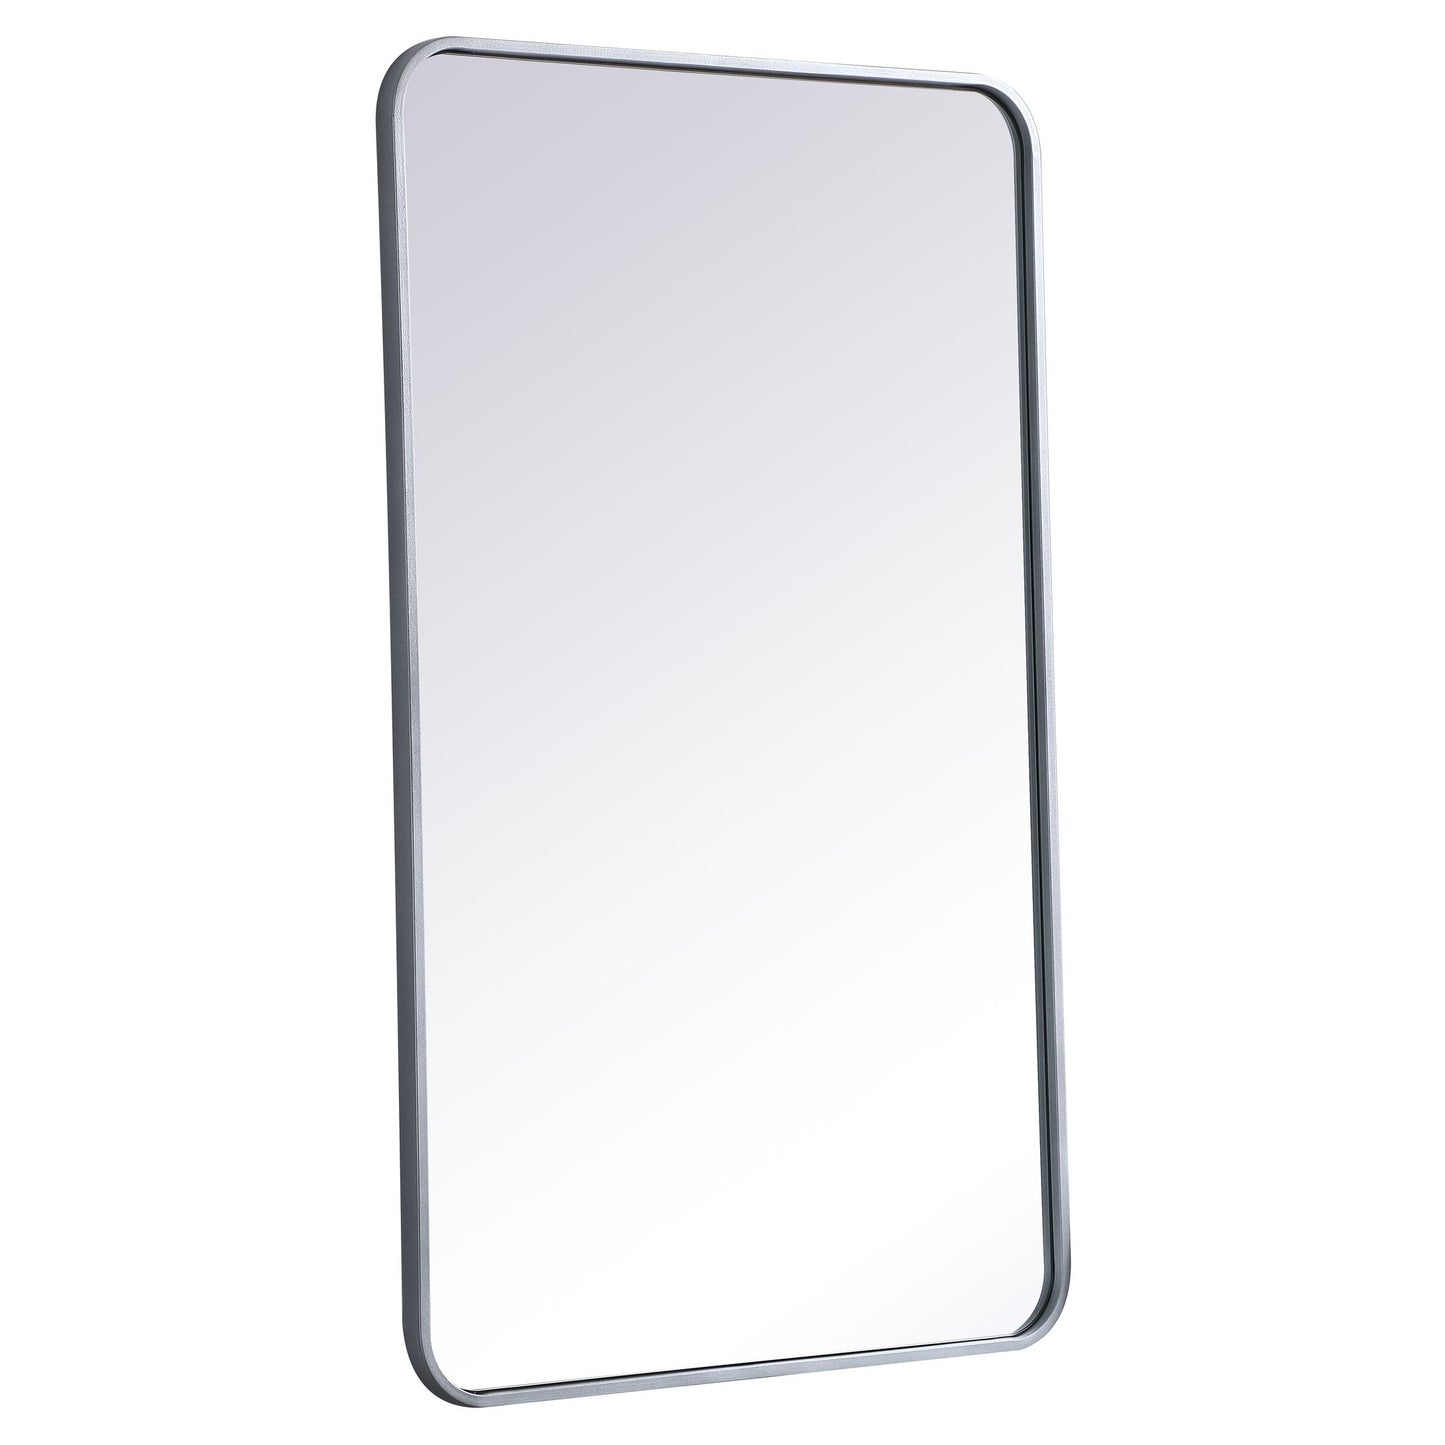 MR802440S Evermore 24" x 40" Metal Framed Rectangular Mirror in Silver